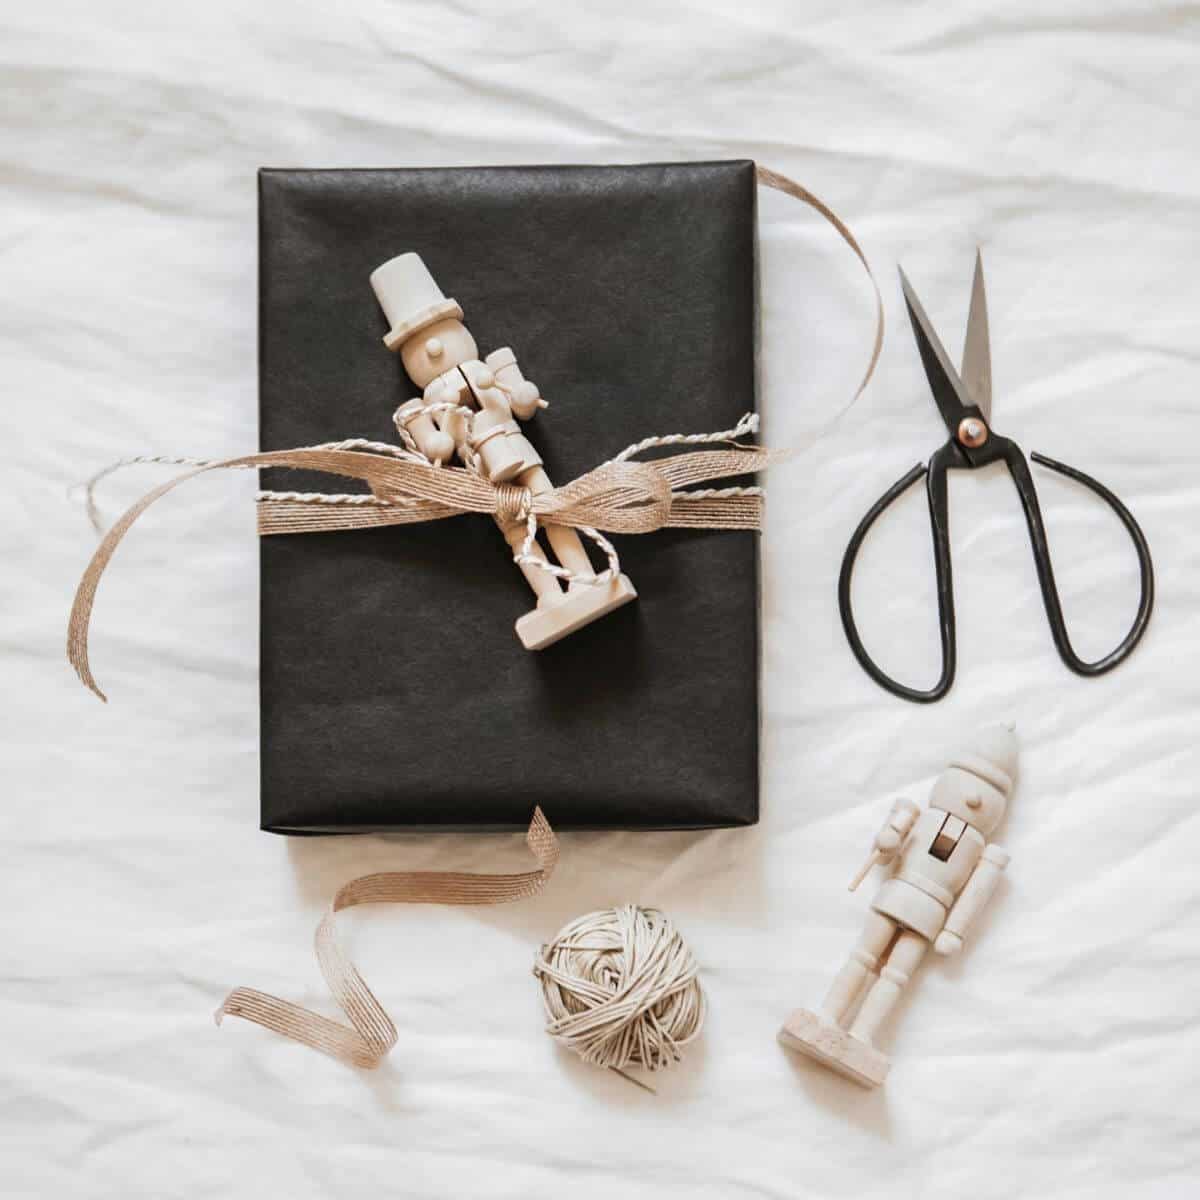 This image shows a black present tied up with a nutcracker and bow.